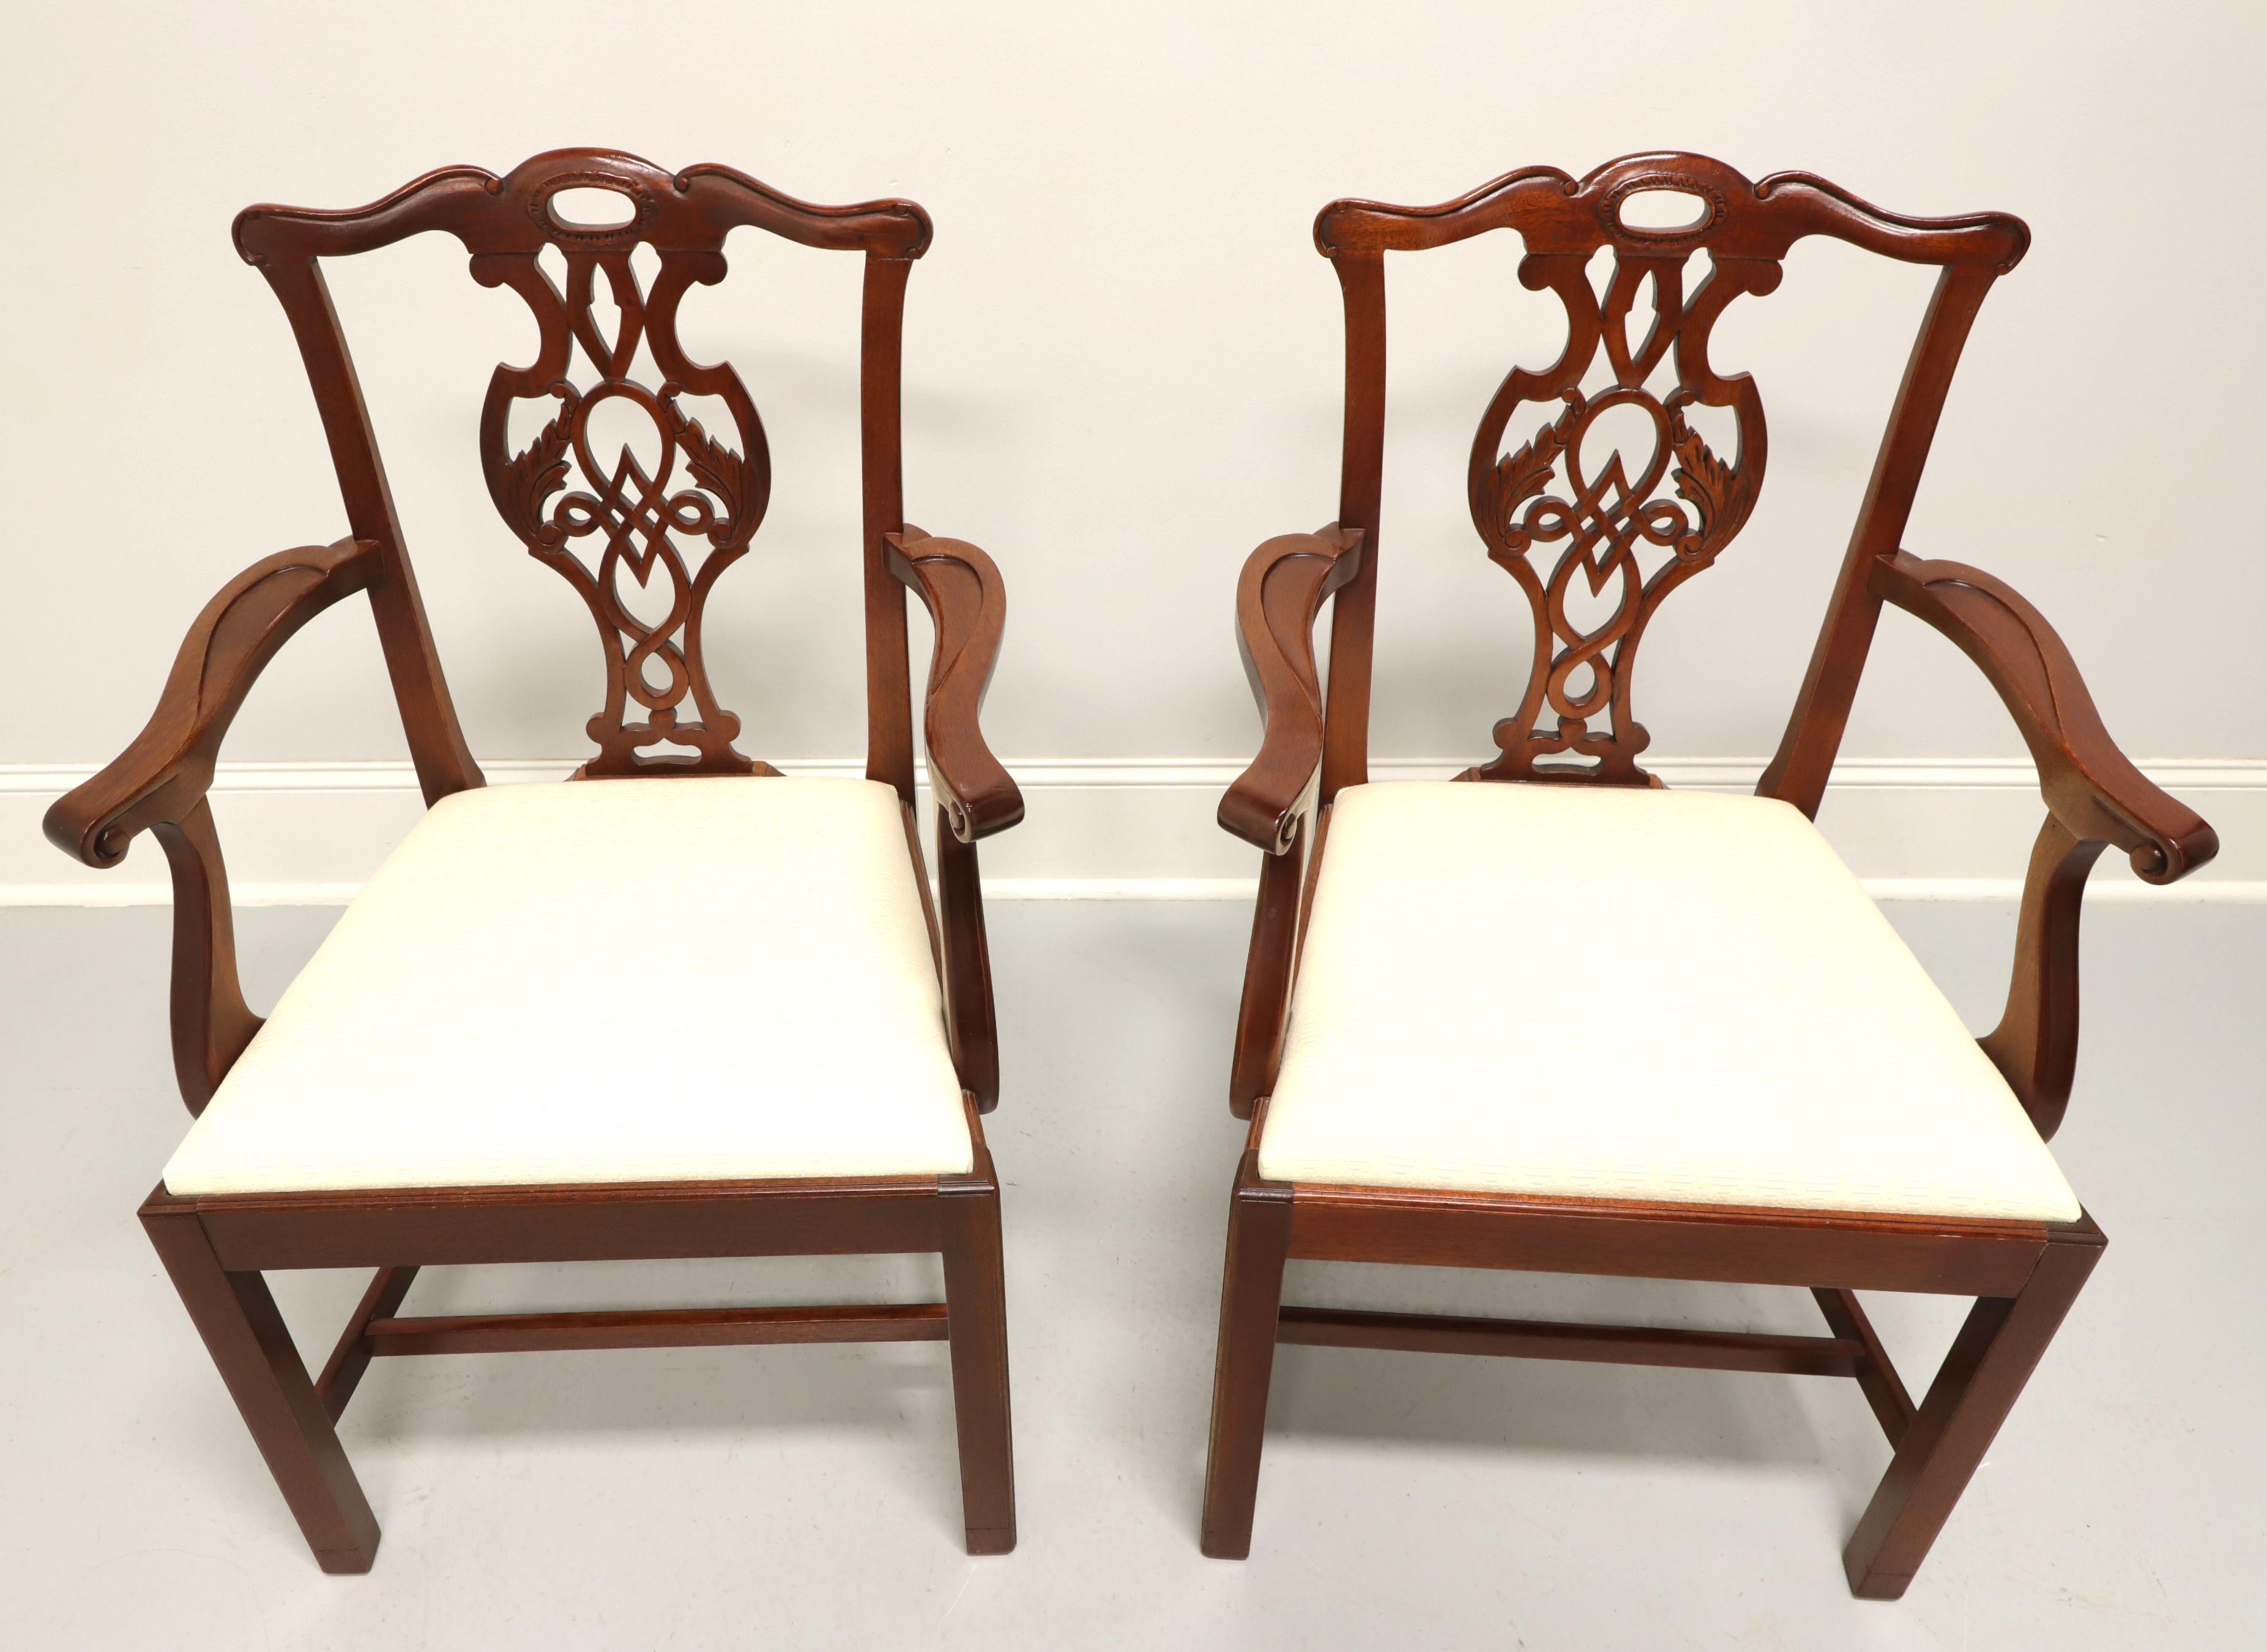 A pair of dining armchairs in the Chippendale style by Baker Furniture, from their Historic Charleston Collection. Solid mahogany with a lighter finish, carved crest rail, carved seat back, curved arms, neutral cream color fabric upholstered seat,